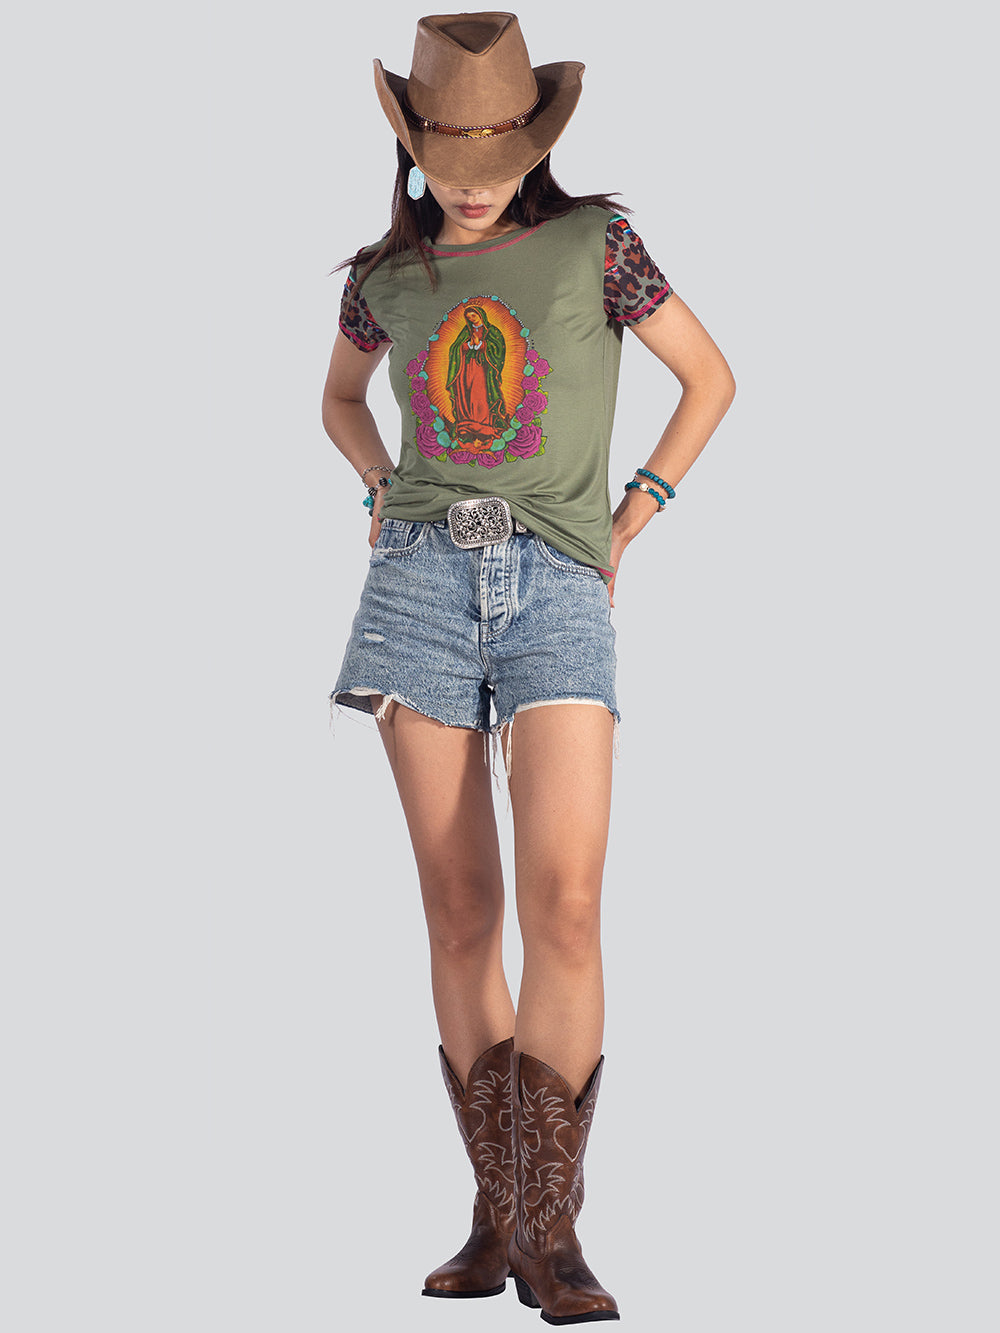 Our Lady of Guadalupe Women's T-Shirt - Cowgirl Wear